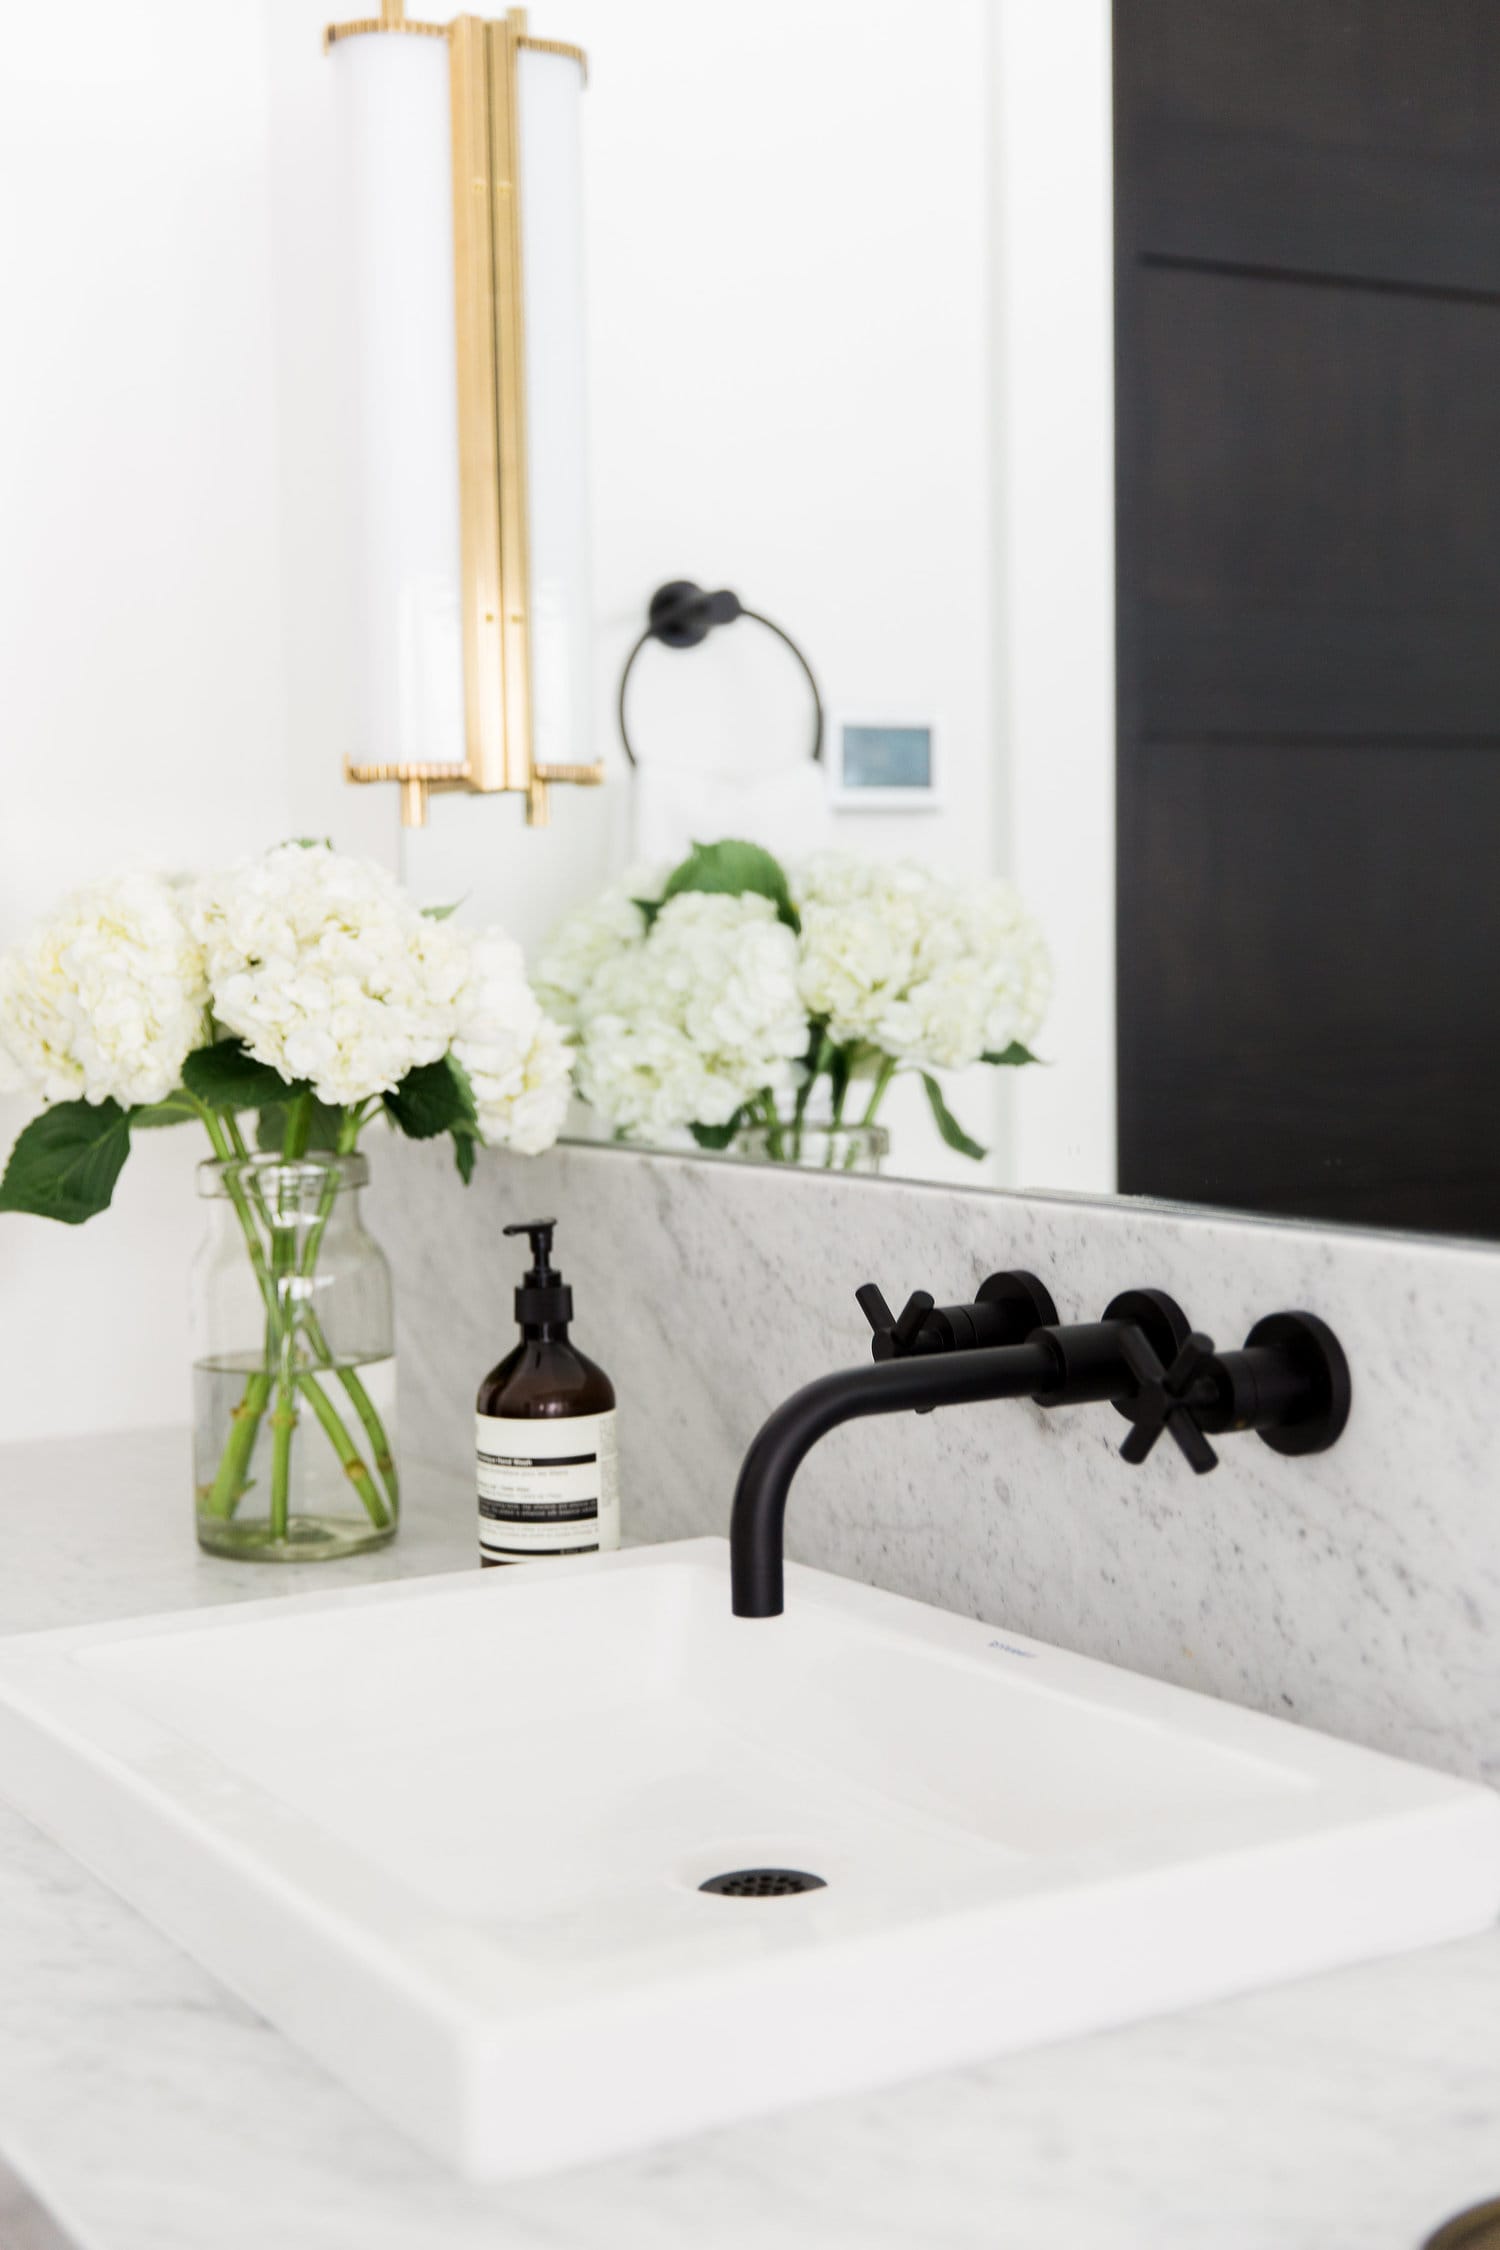 Matte Black Fixtures Where To Find Them For Less Apartment Therapy